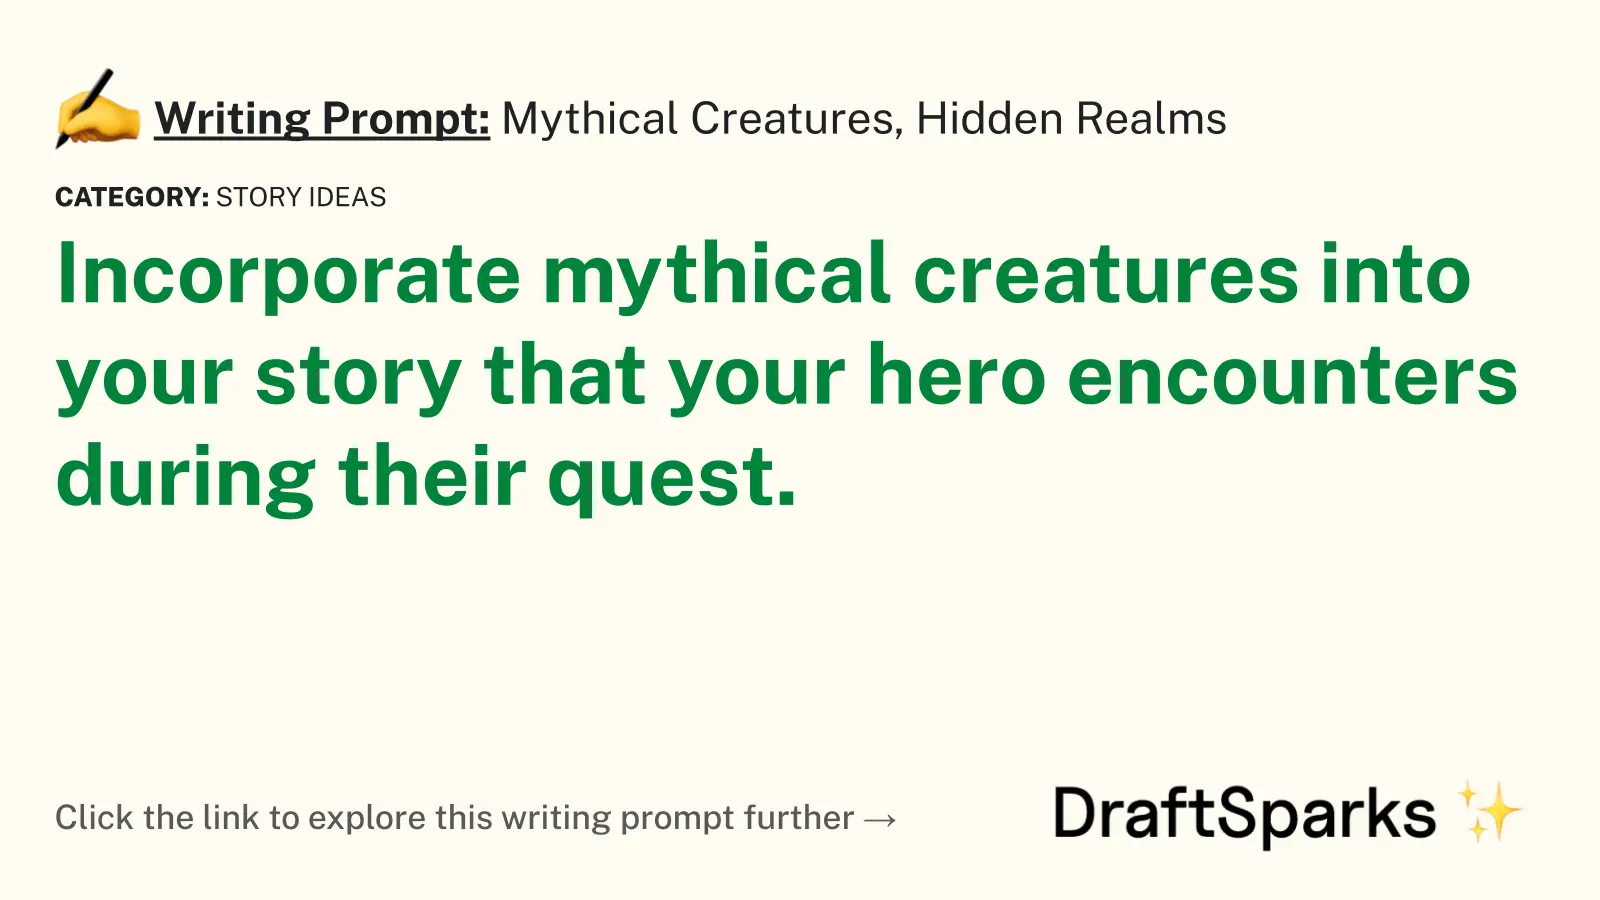 Mythical Creatures, Hidden Realms